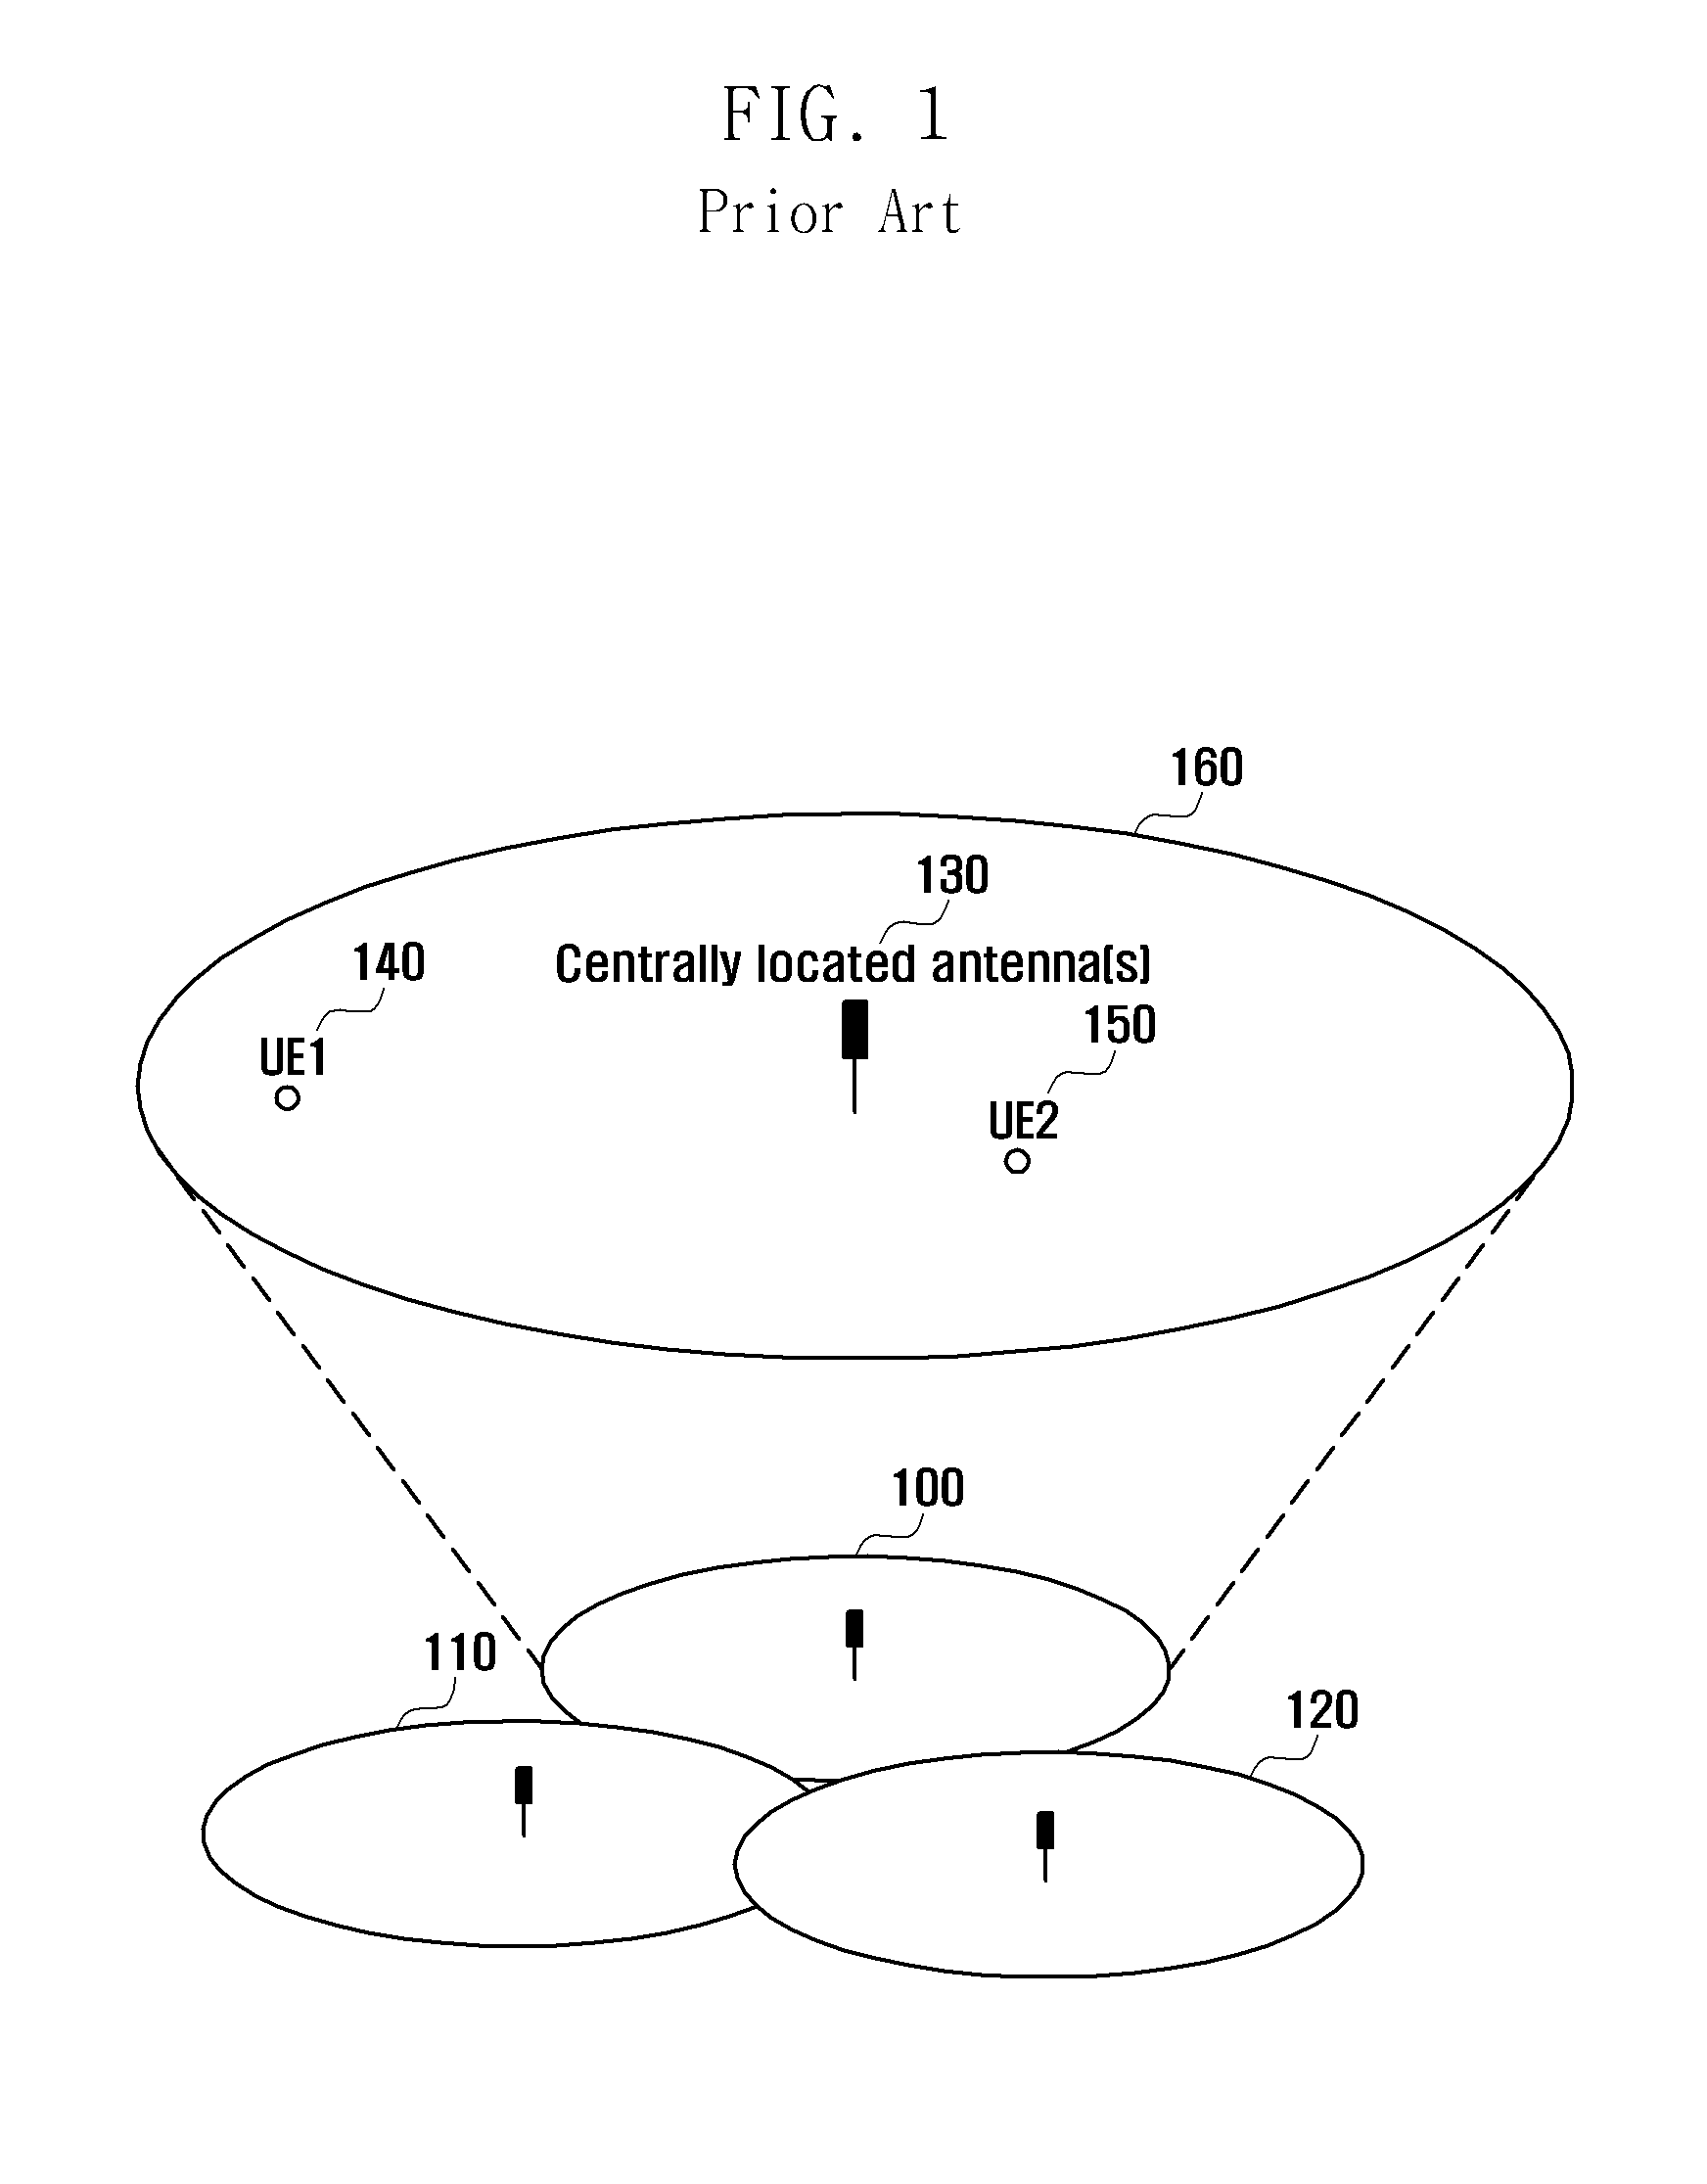 Antenna allocation apparatus and method for cellular mobile communication system